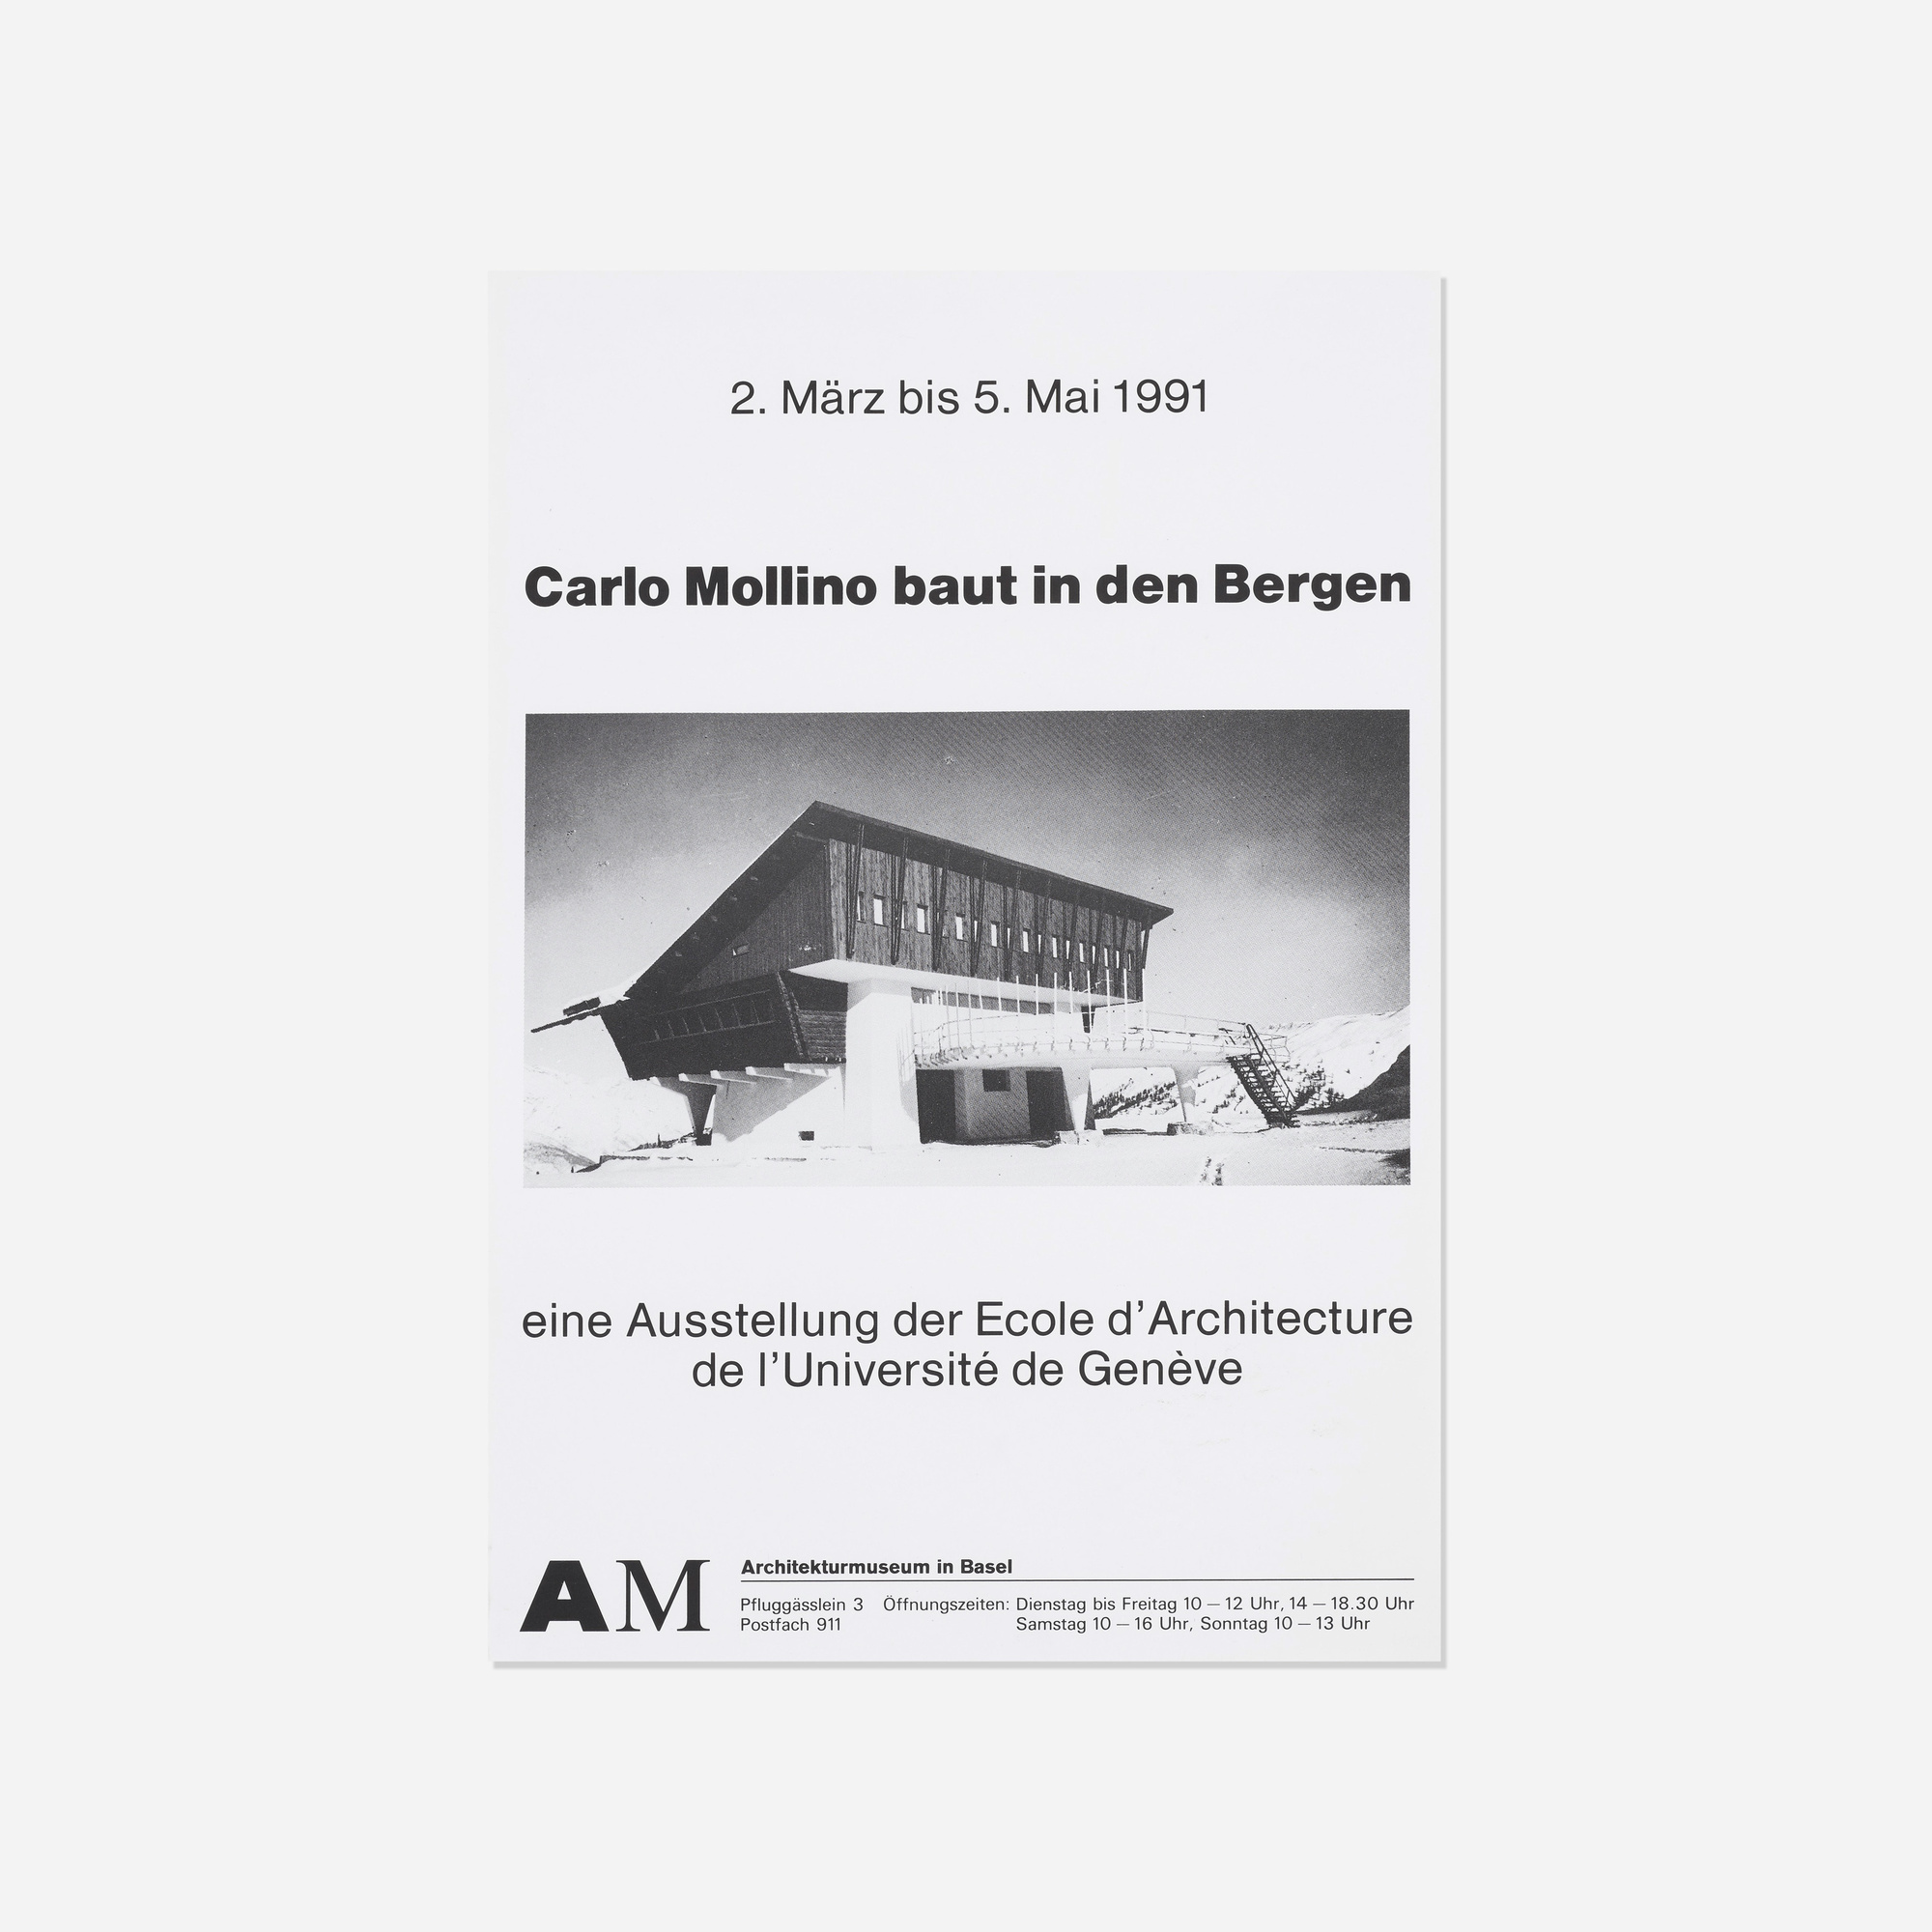 318: Carlo Mollino exhibition poster < The Boyd Collection – IV. Word + November 2018 < Auctions | Wright: Auctions of Art and Design